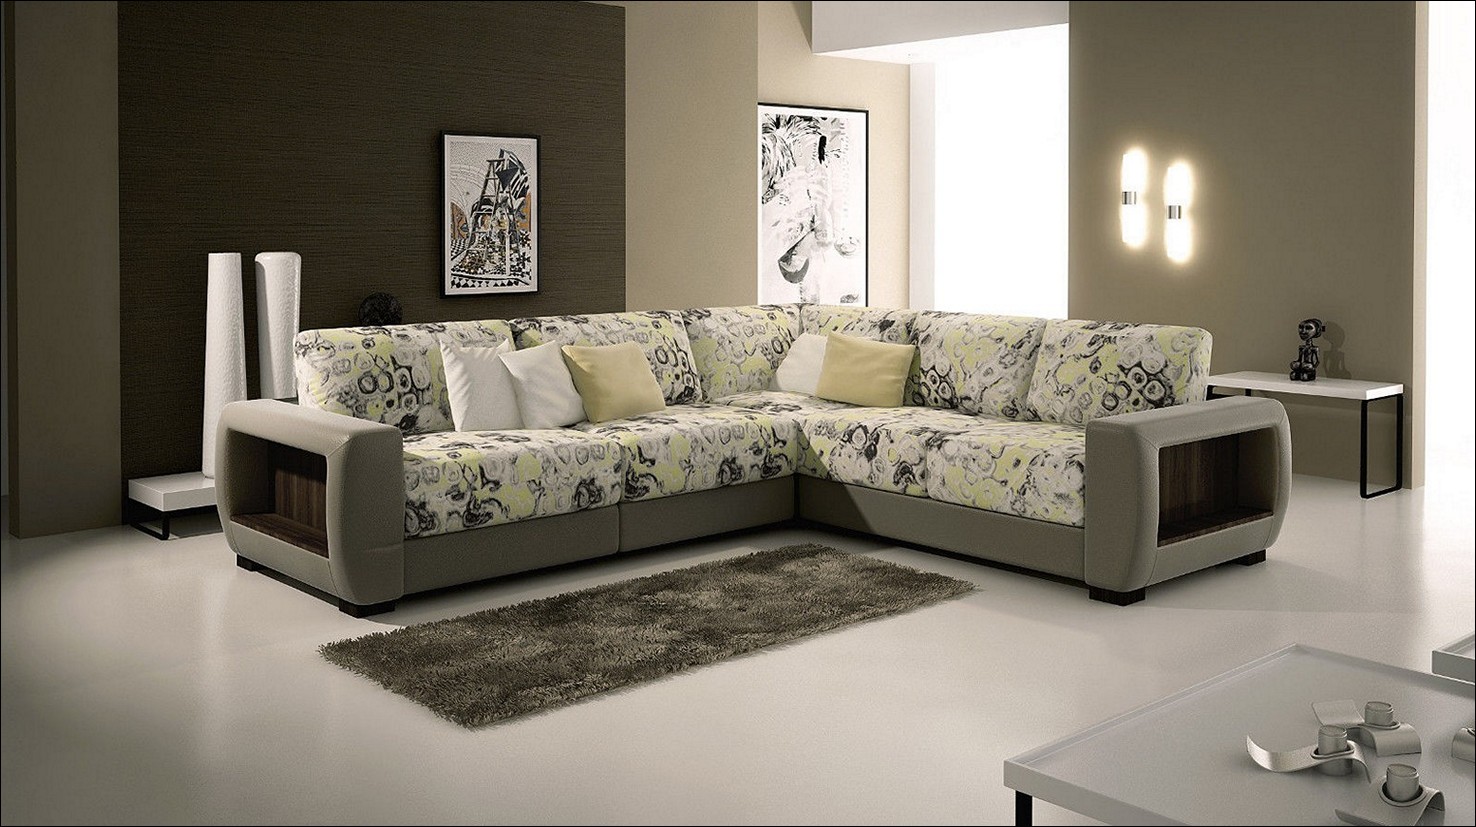 Wallpapers for Living Room Design Ideas in UK